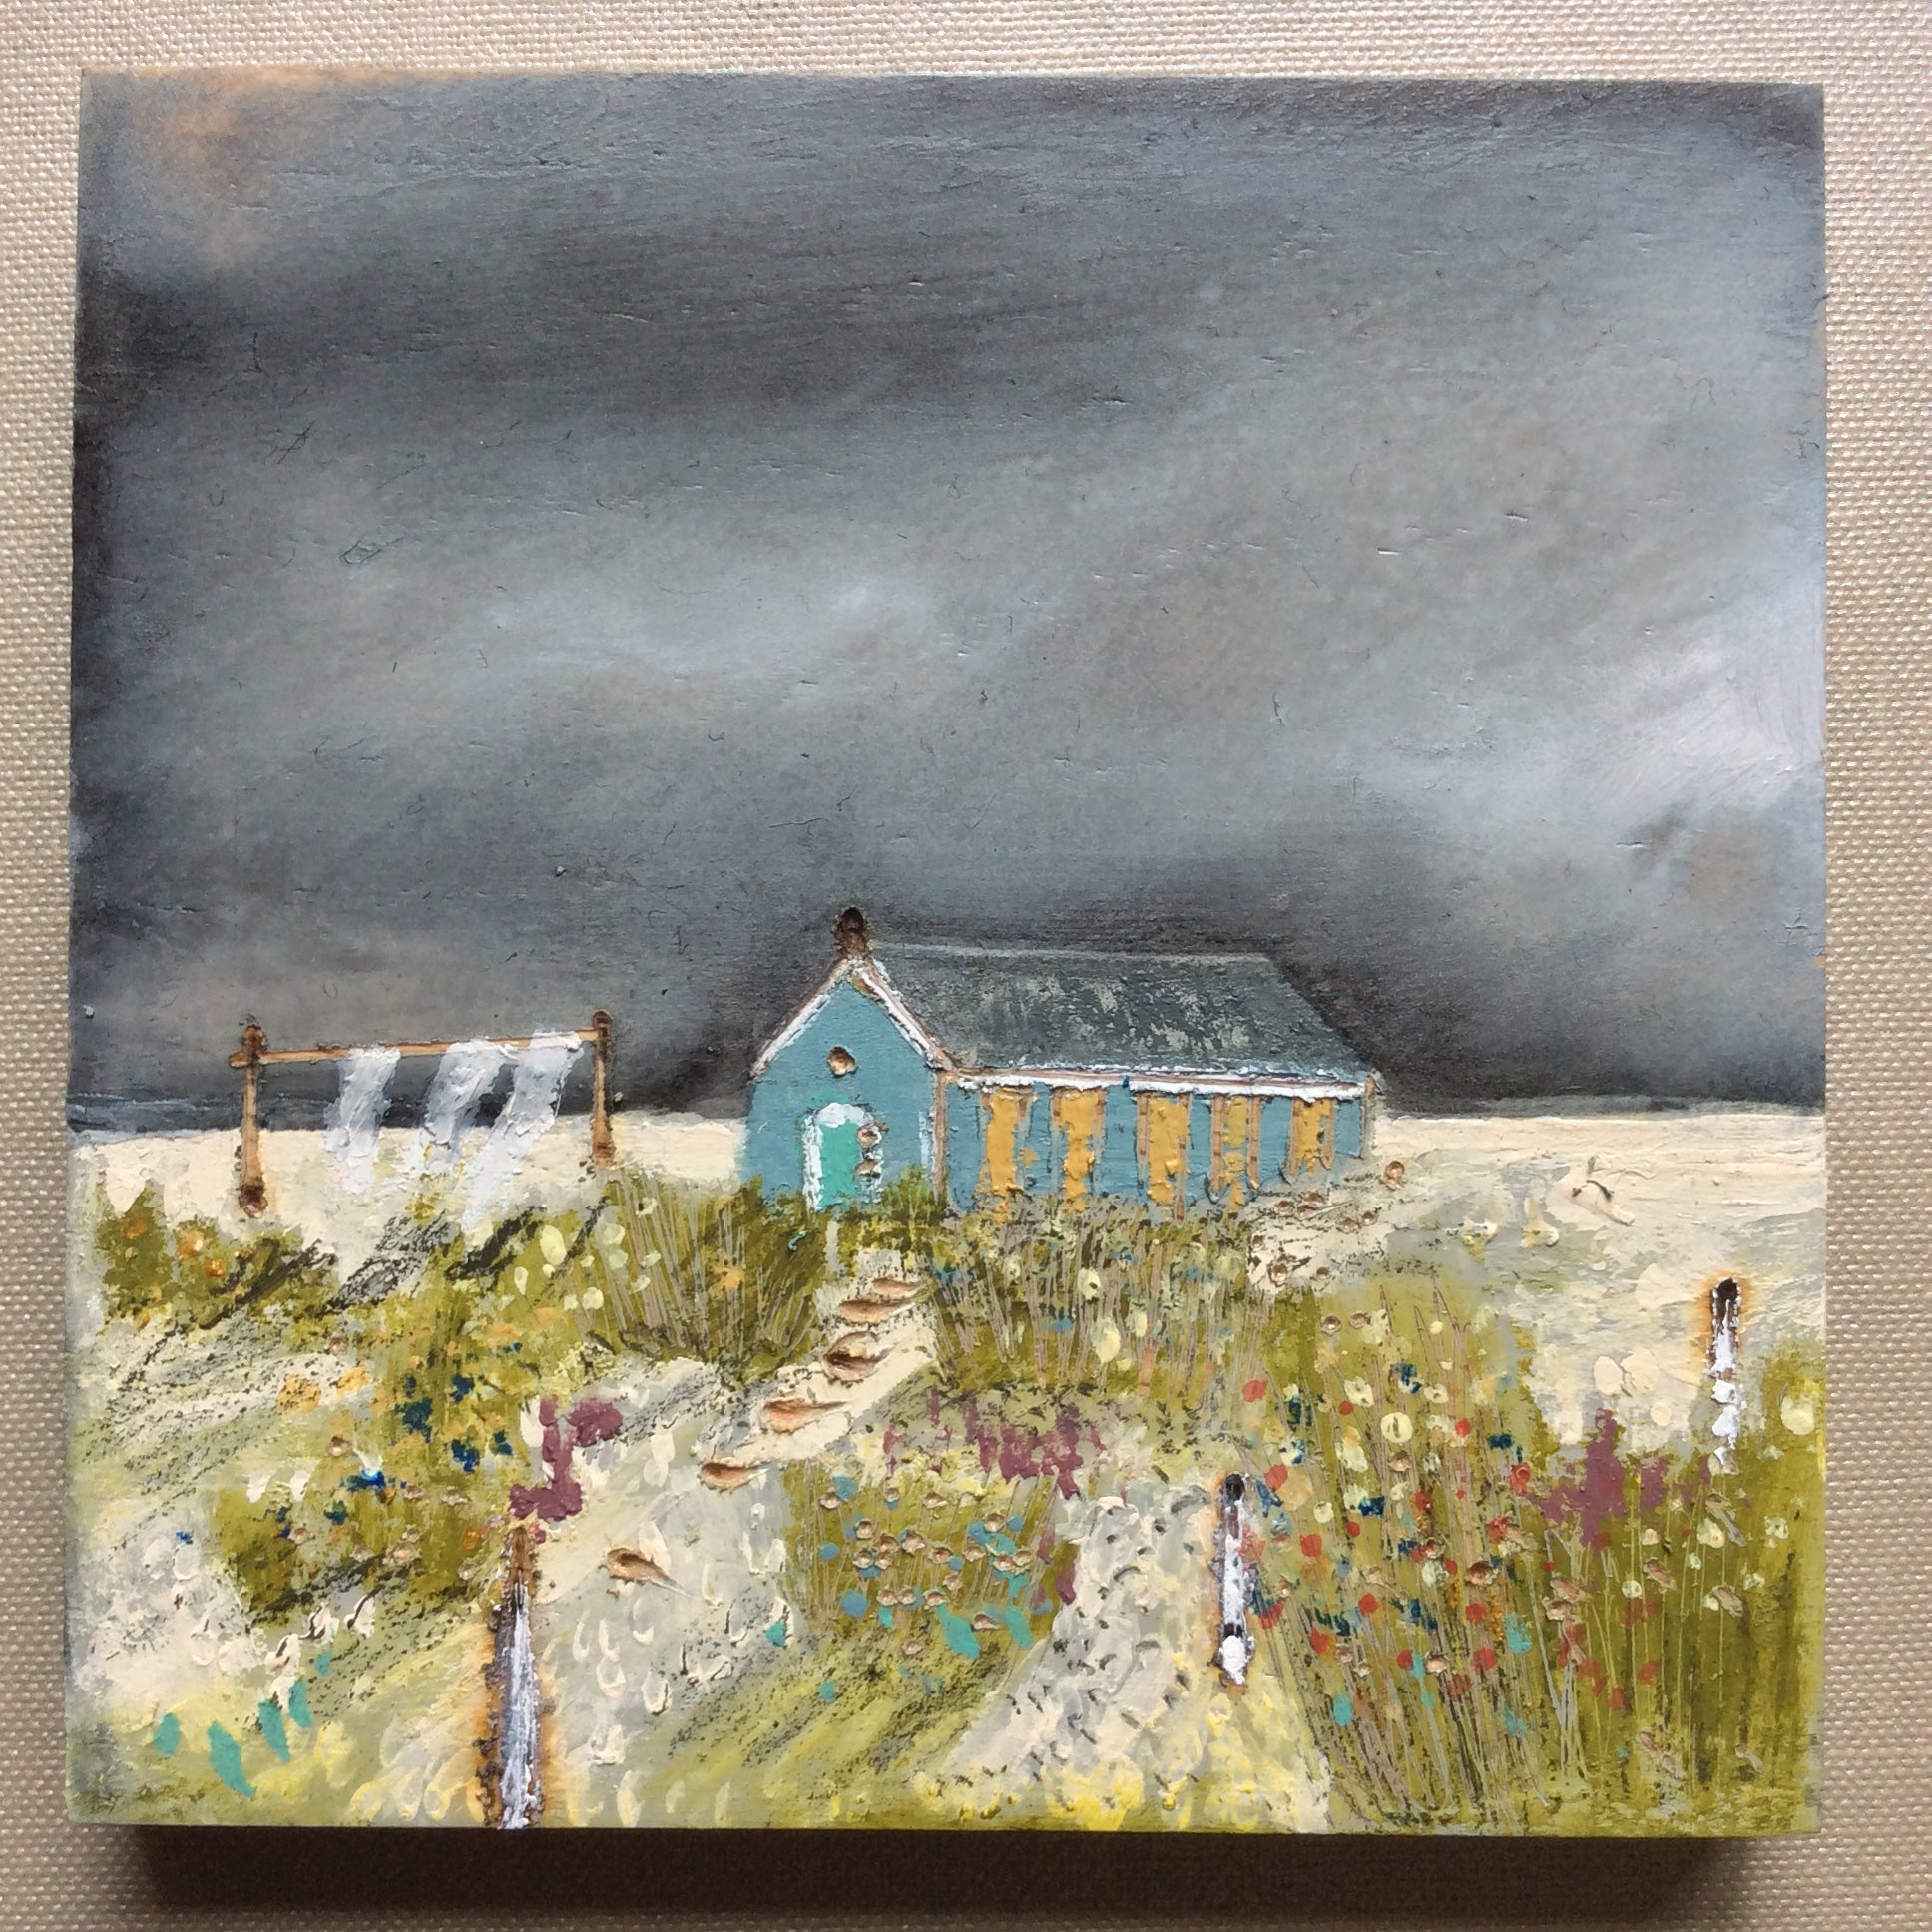 Mixed Media Art on wood By Louise O'Hara - "A beach hut in blue”